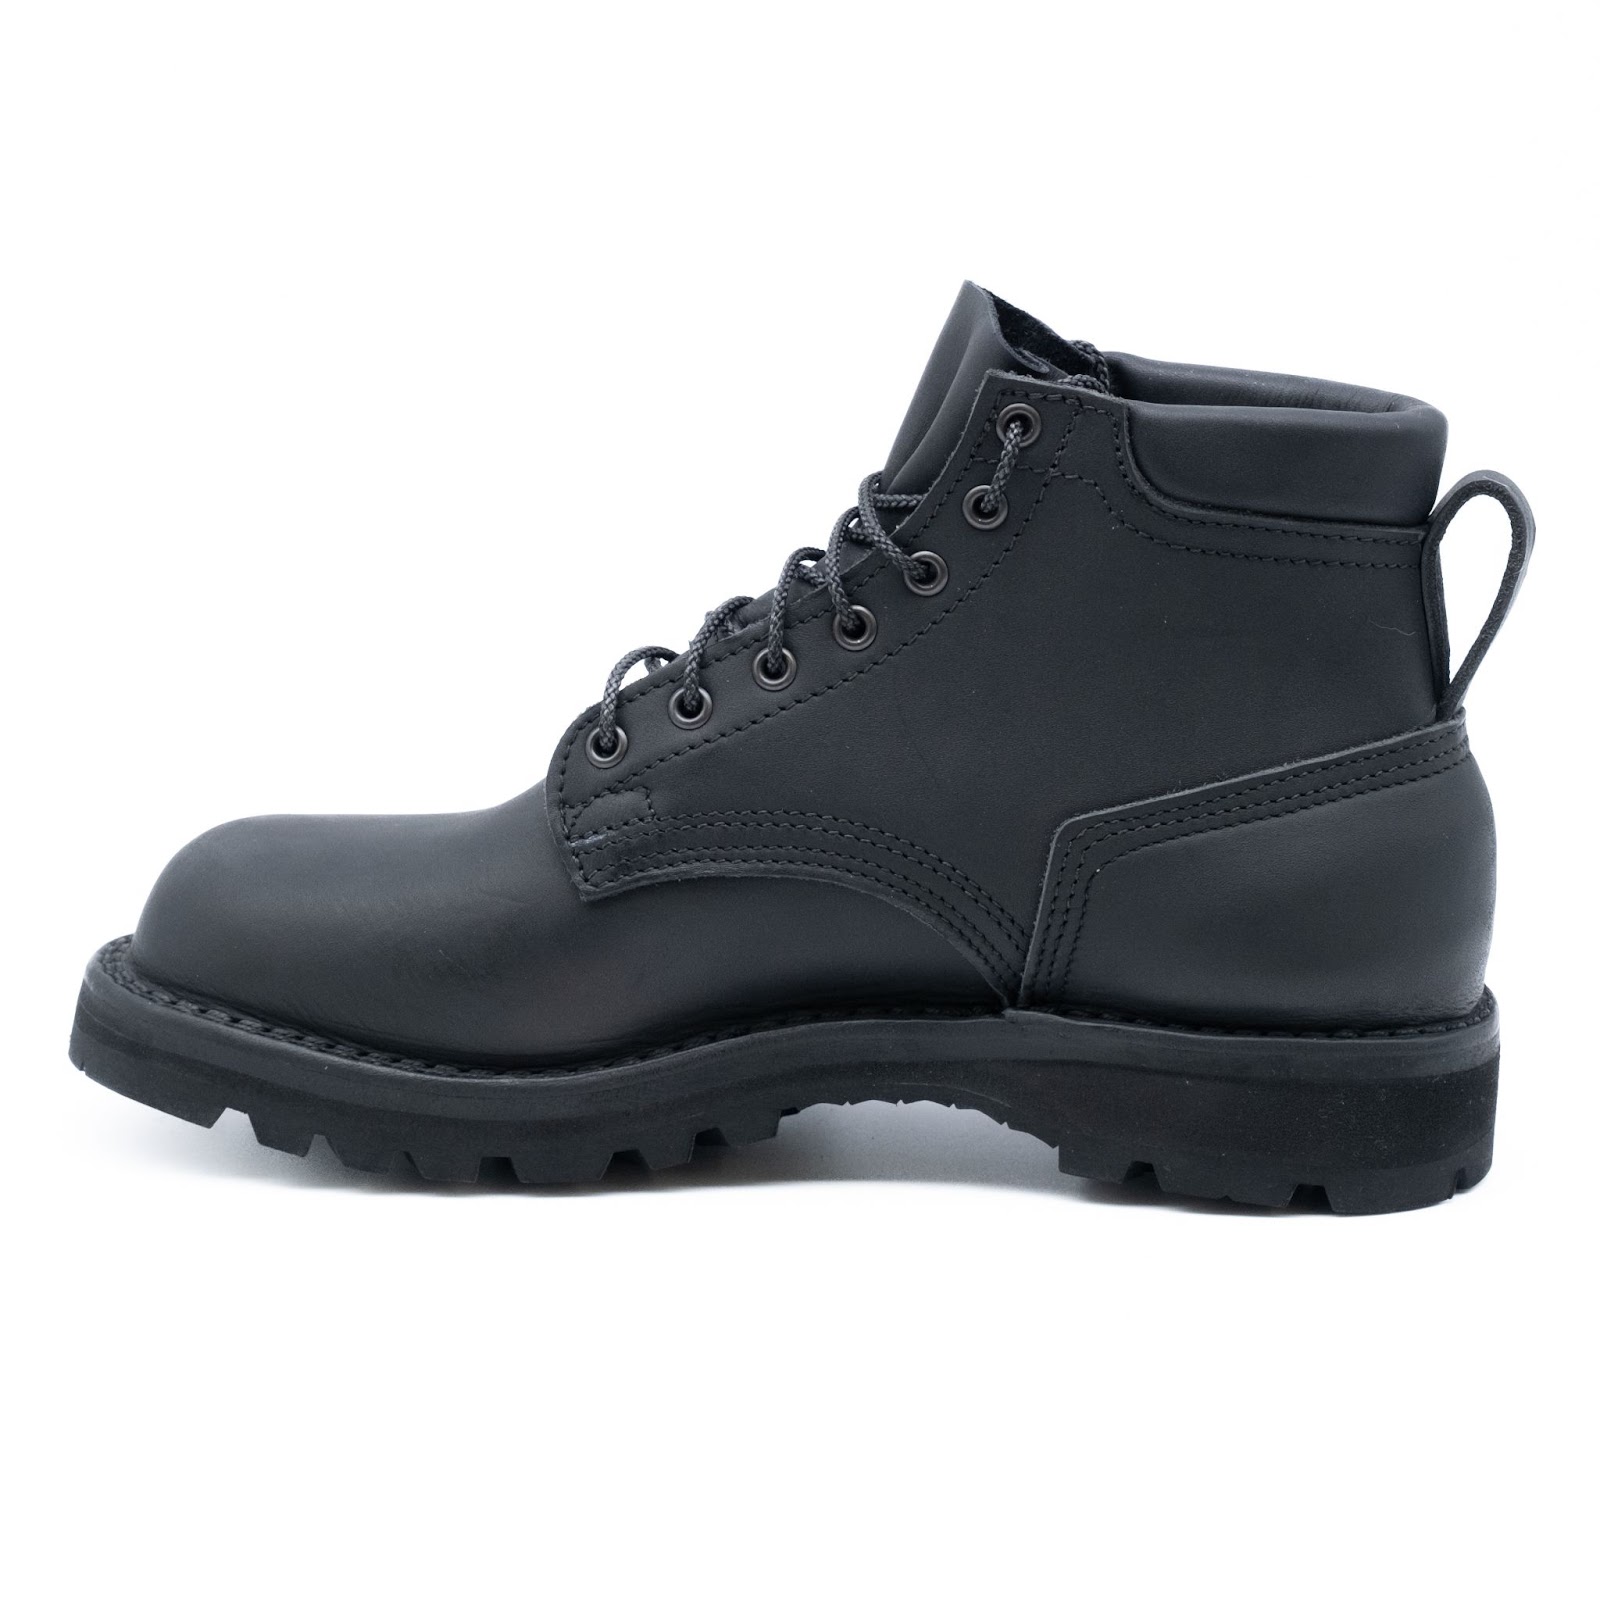 Firefighting boots: Marshal Duty Boot - Black - Quick Ship!